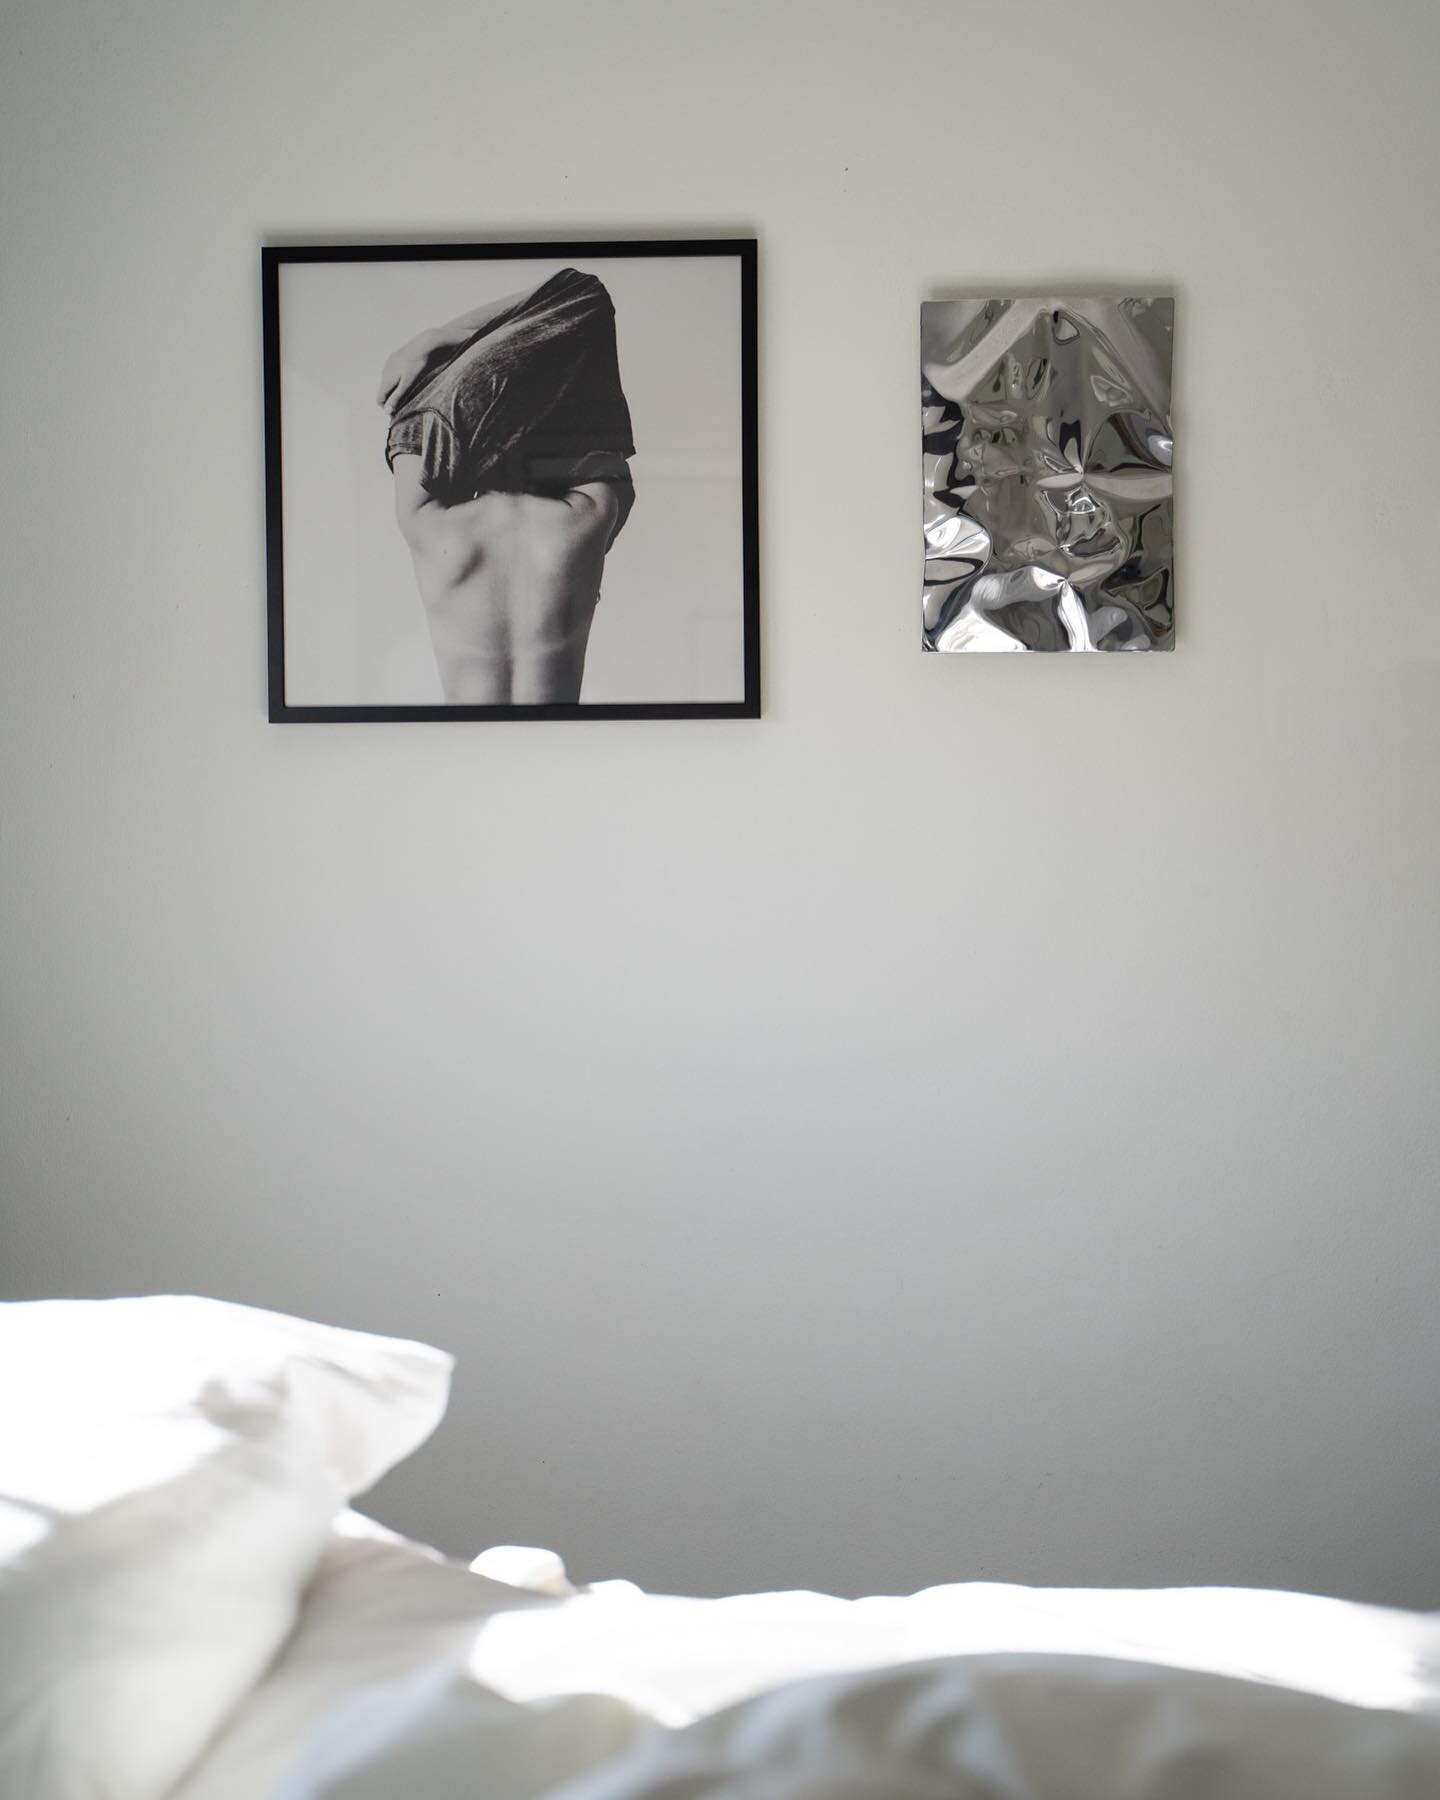 An artfully layered bedroom ▓ ▒

We worked directed with a creator on @wescoverapp to create this beautifully modern, polished stainless steel piece. The contrast between the black and white framed photography and contemporary art creates a balance o